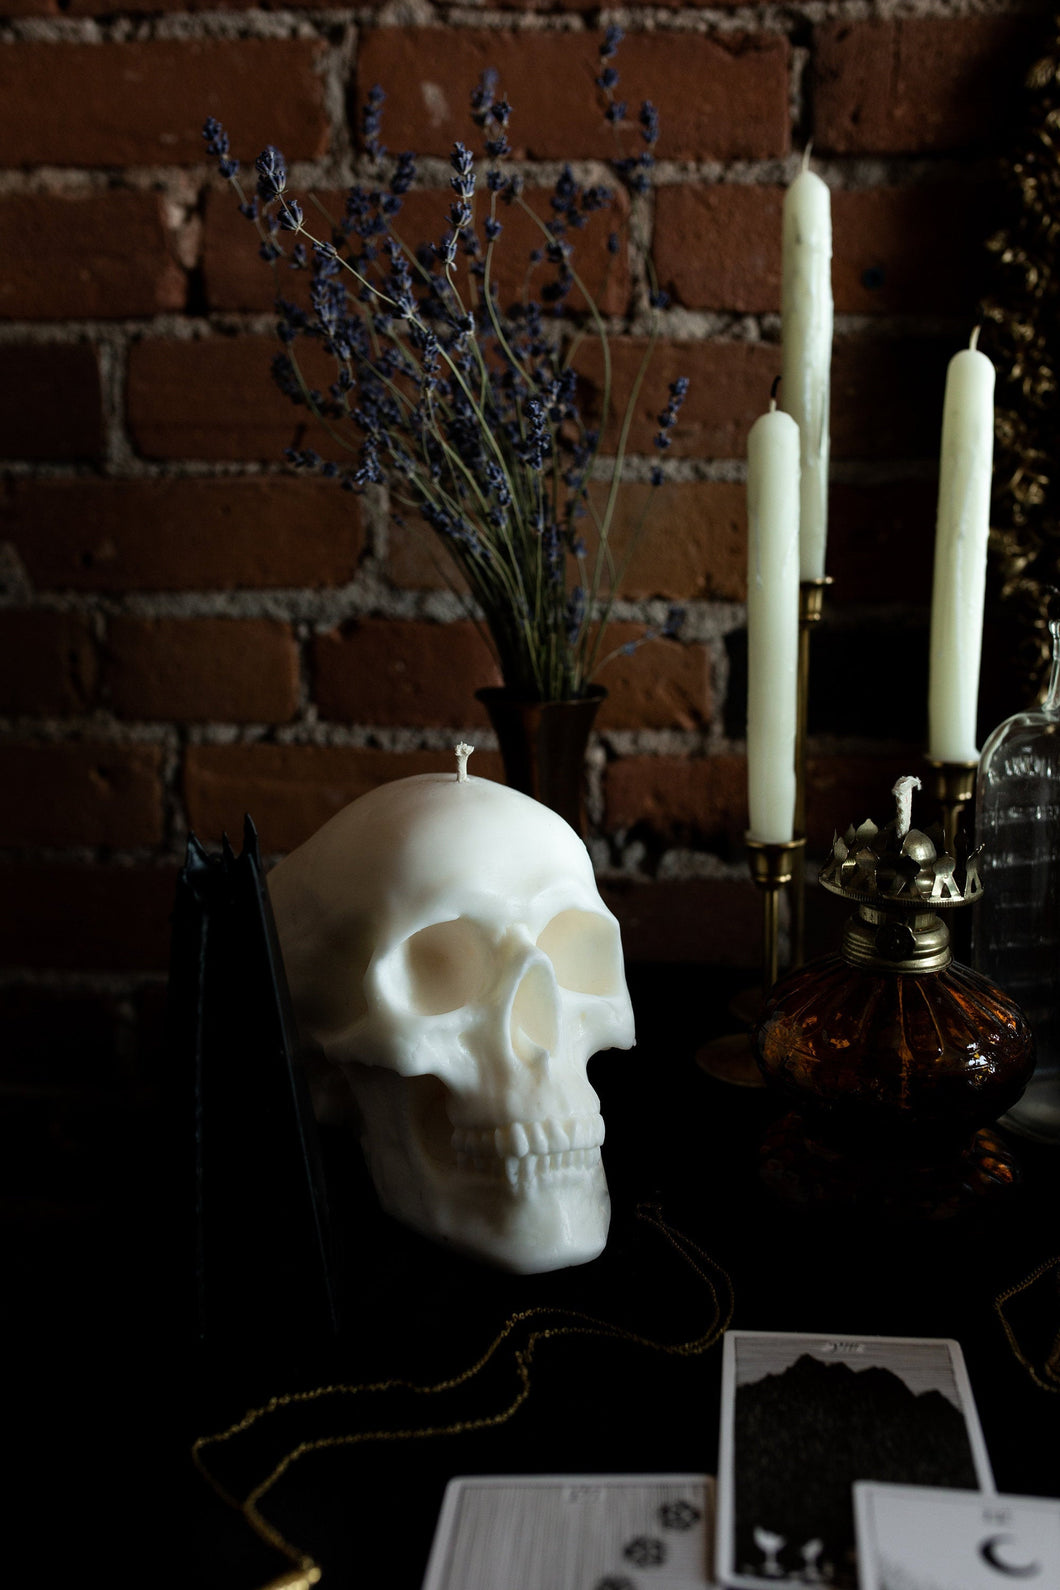 Large Skull Candle / Human Size Skull Candle / White Skull Candle / Halloween Candle